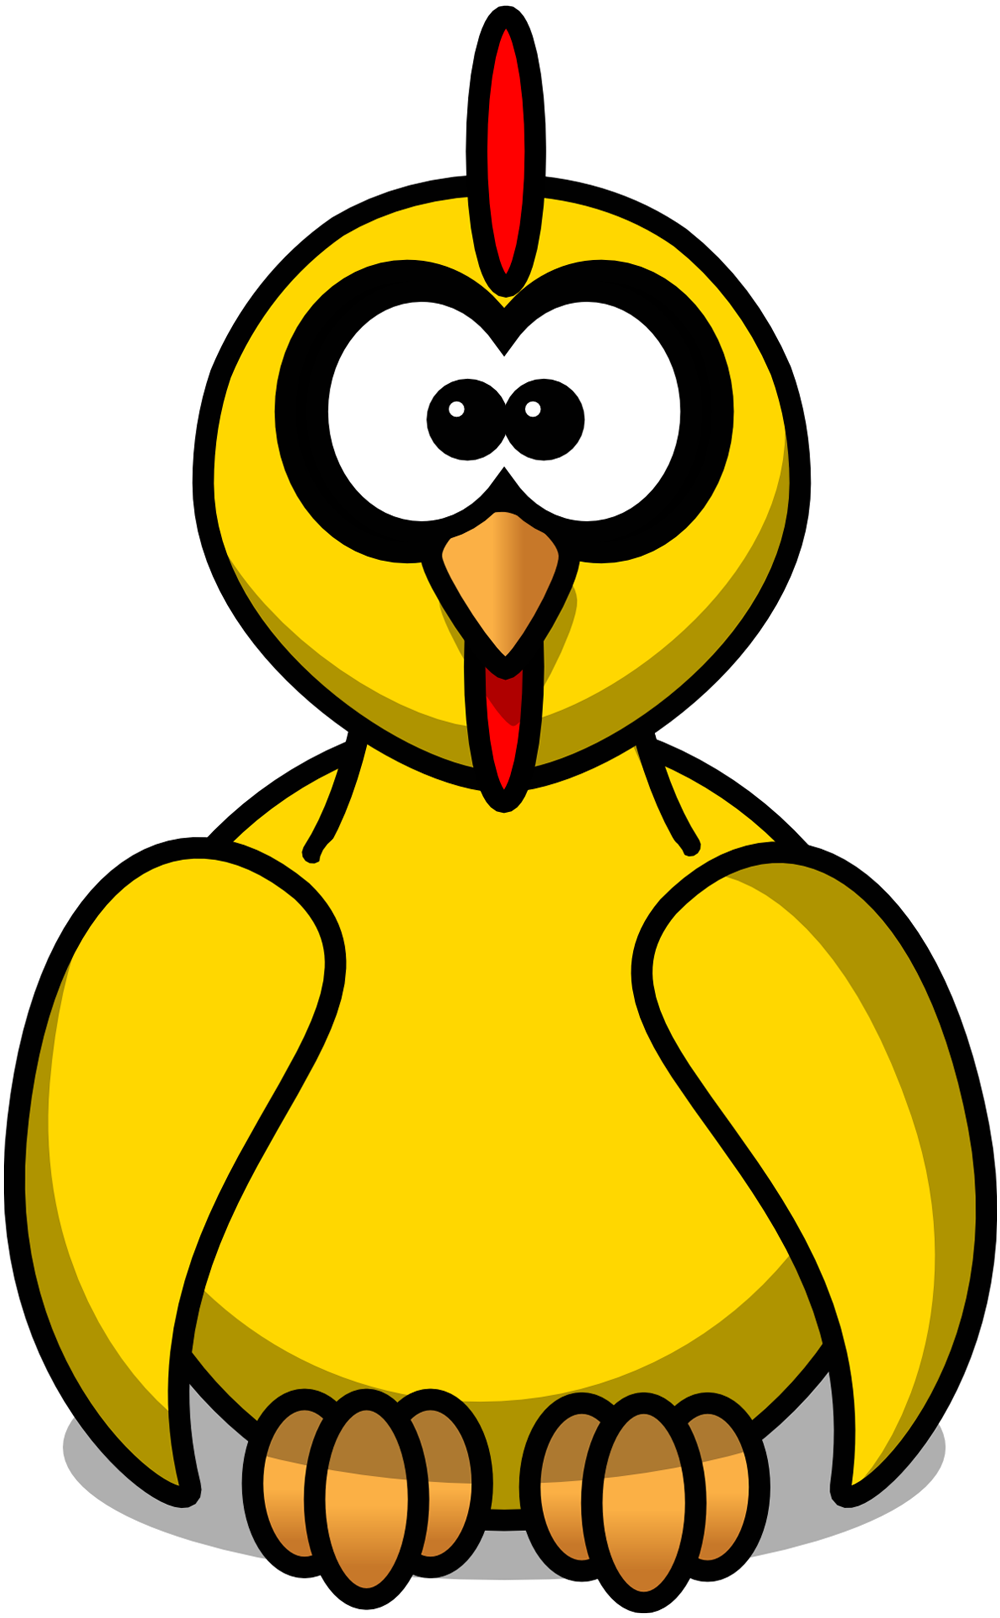 illustration of a bright yellow chicken